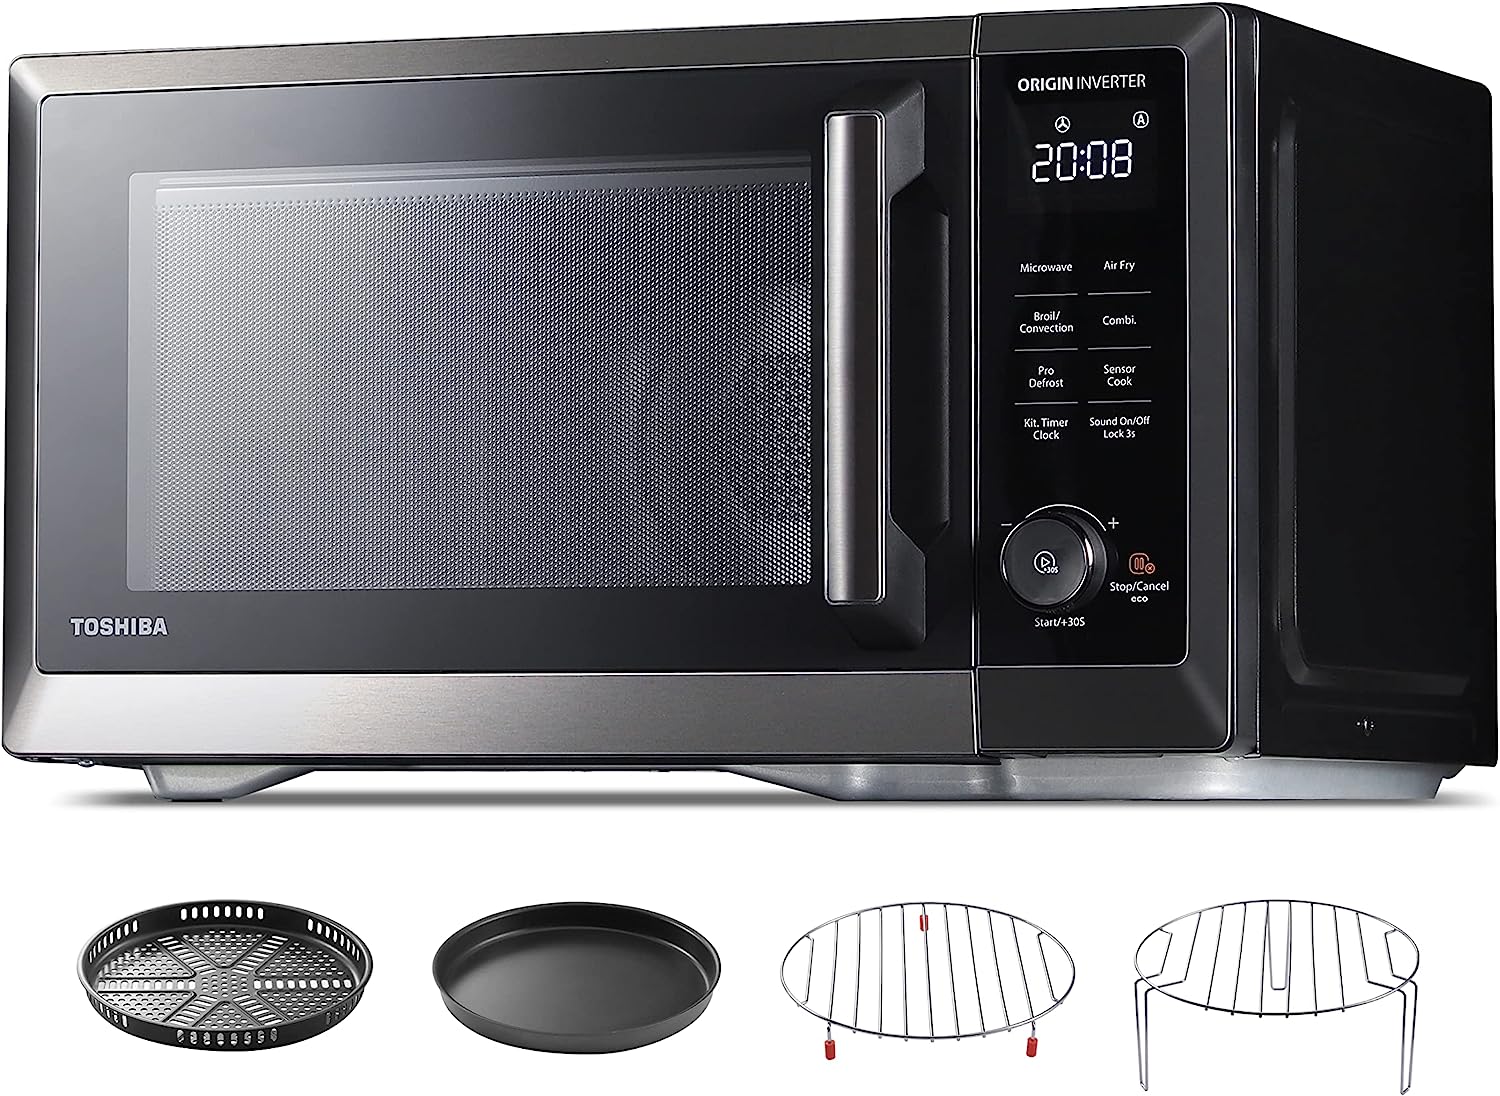 TOSHIBA 7-in-1 Countertop Microwave Oven Air Fryer [...]